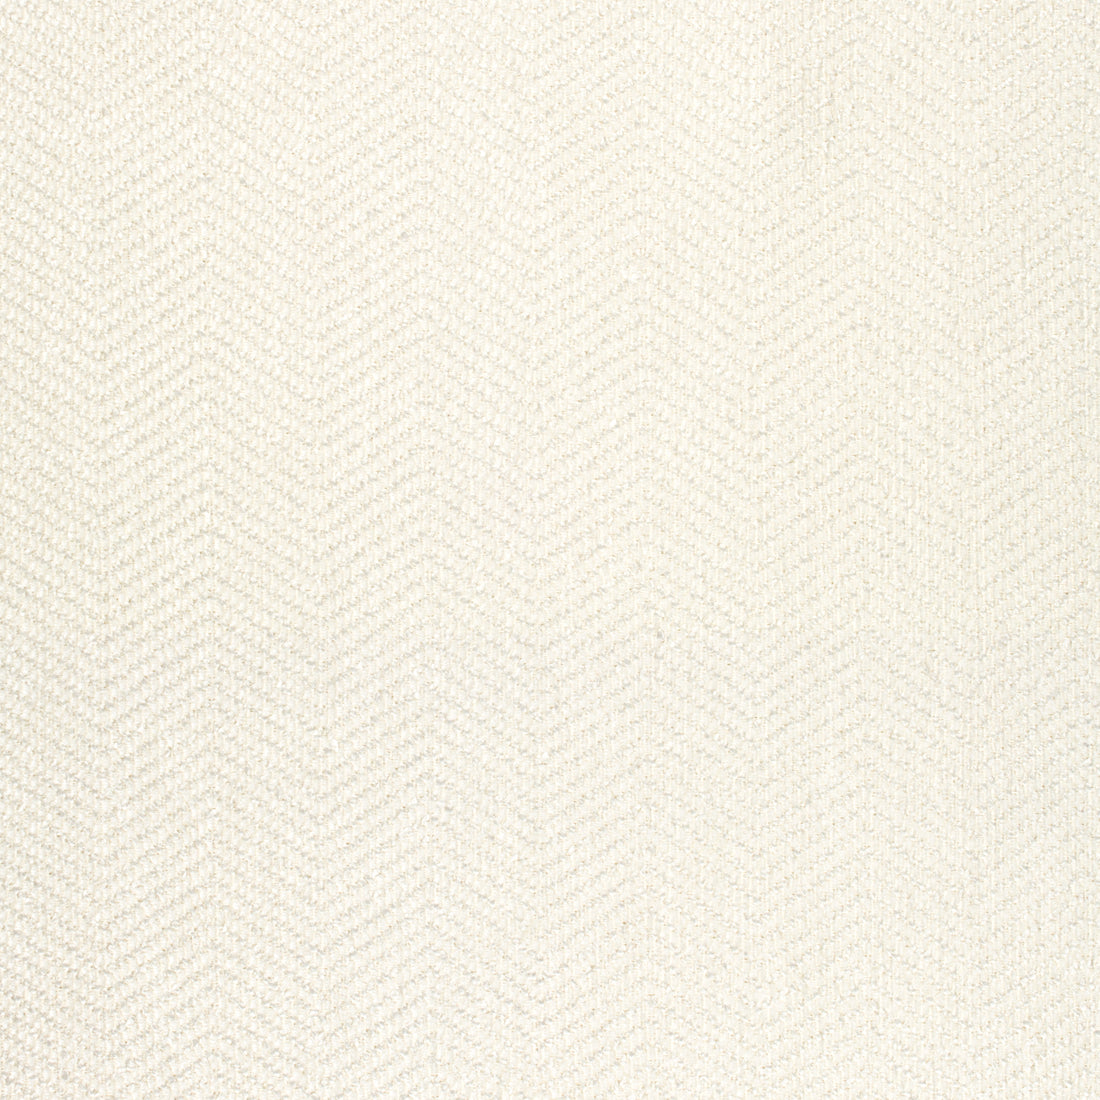 Dalton Herringbone fabric in ivory color - pattern number W80621 - by Thibaut in the Pinnacle collection